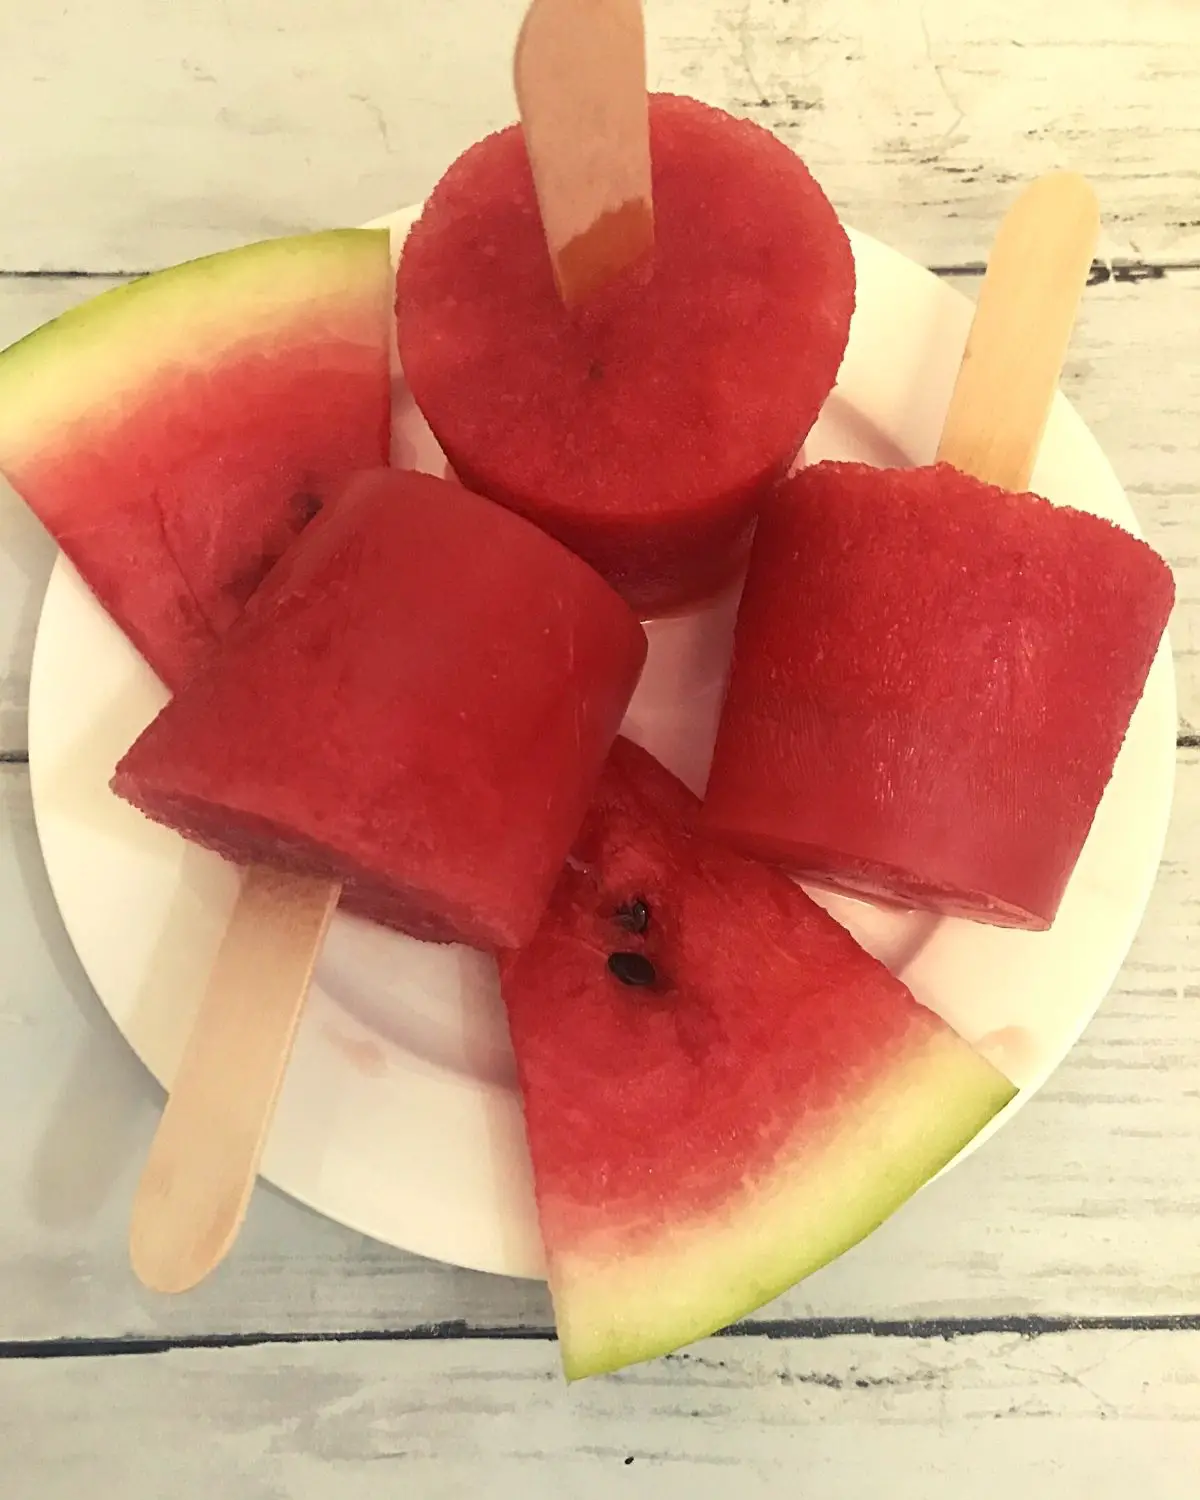 3 watermelon popsicles in a plate